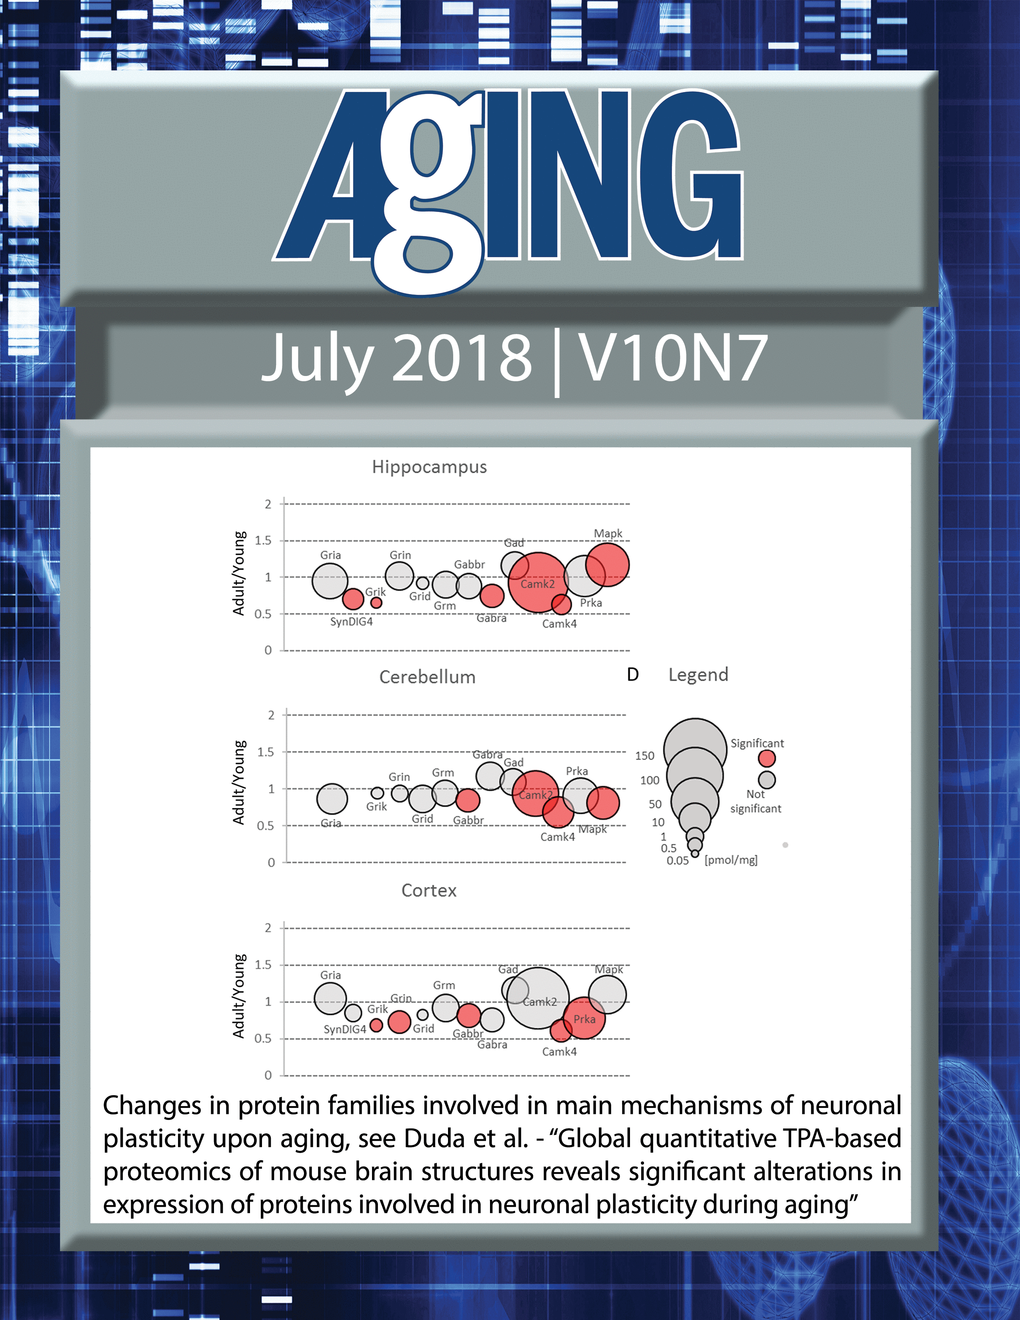 The cover for issue 7 of Aging features Figure 3 "Changes in protein families involved in main mechanisms of neuronal plasticity upon aging" from Duda et al.